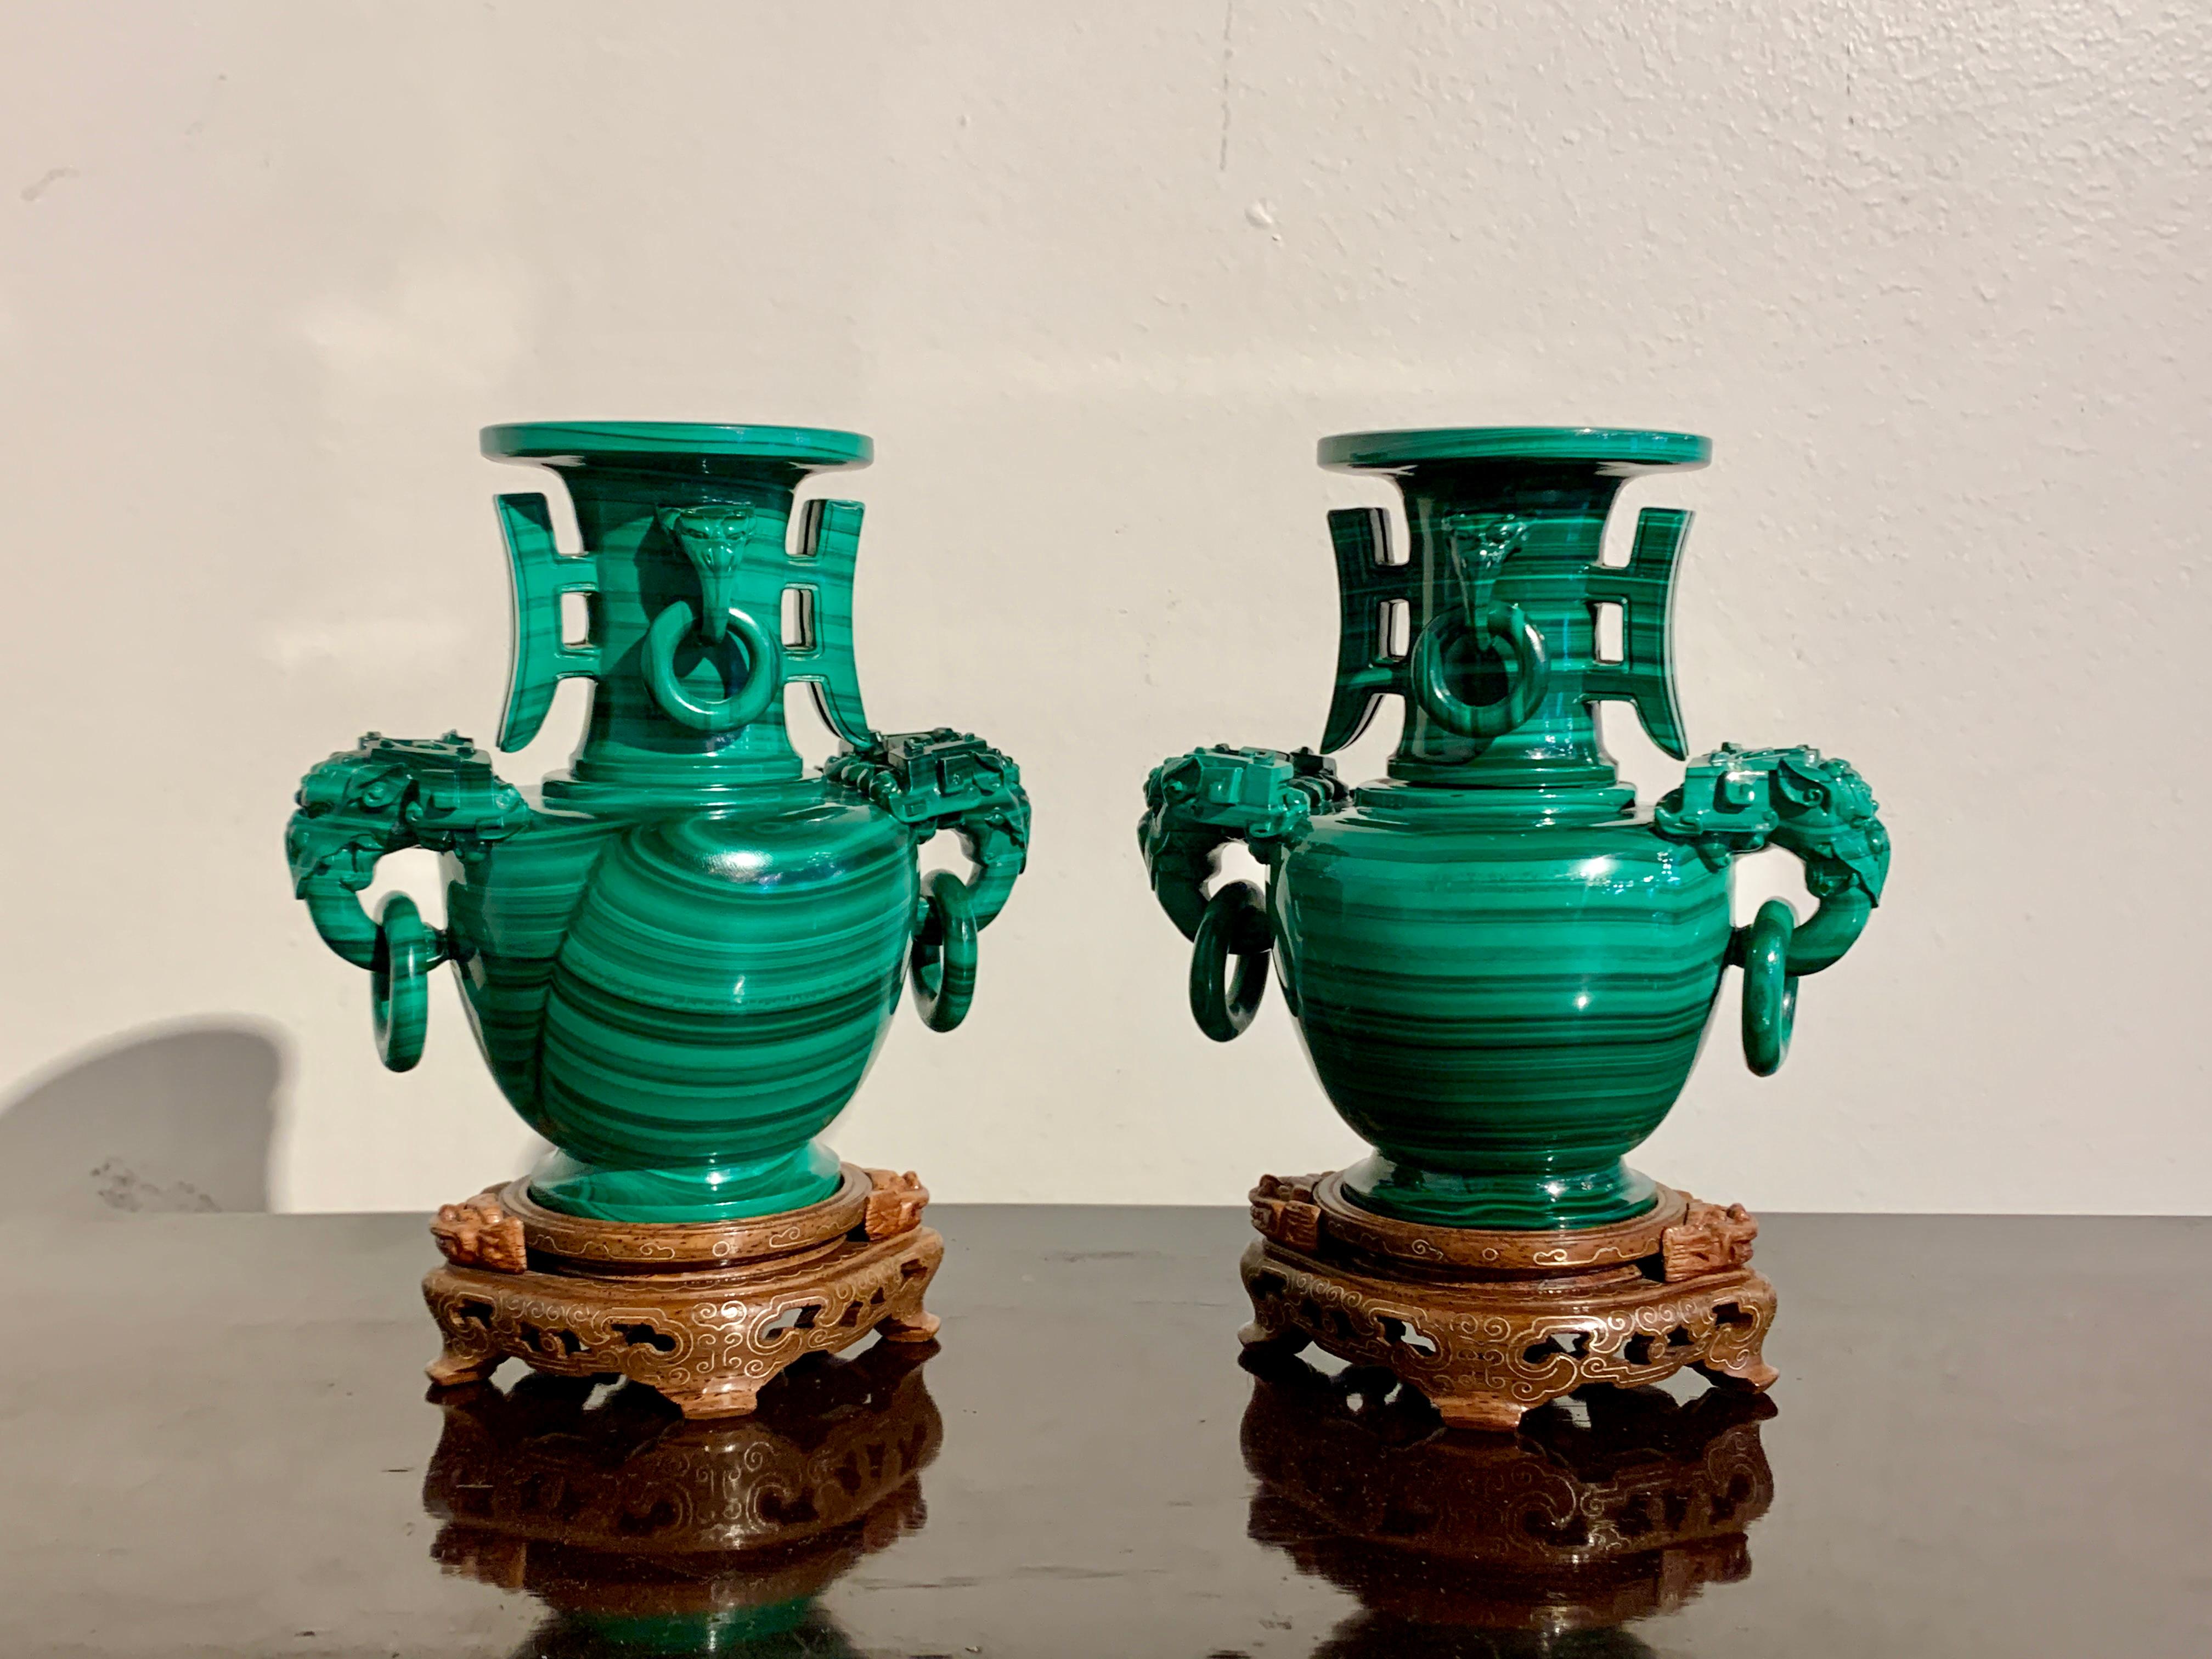 A fine and well carved Chinese pair of carved malachite vases with loose ring handles and fitted bases, Republic Period, mid 20th century, China.

The vases carved from solid malachite of exceptional color and featuring spectacular striations. The